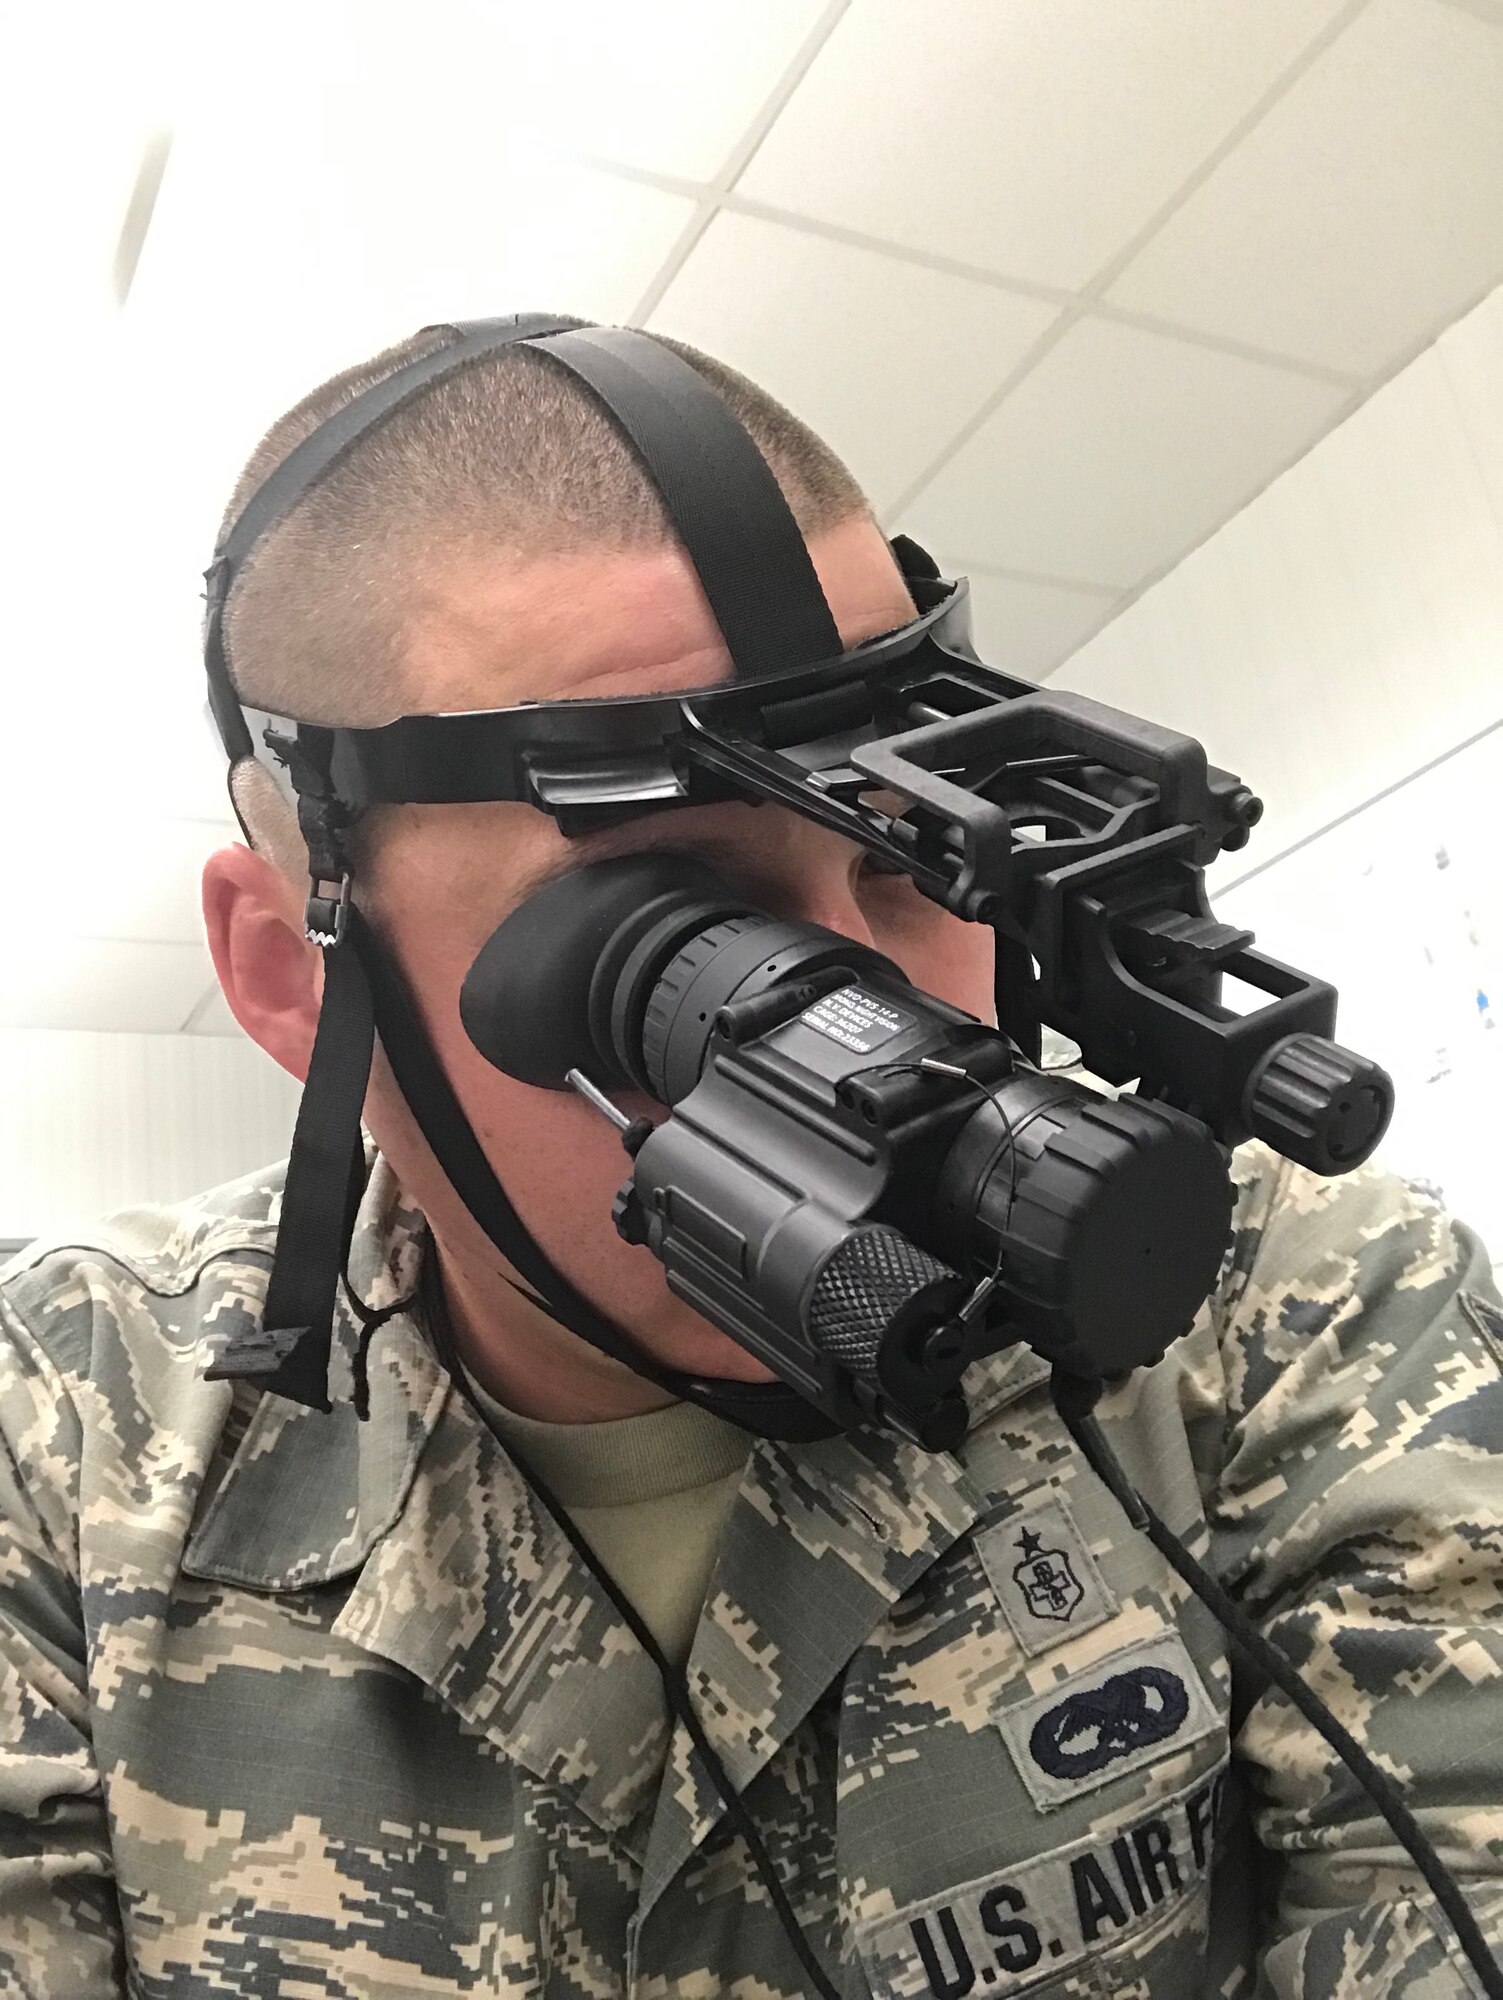 In 2013, a career change from Aircraft Maintenance (Avionics) to Pharmacy Technician, combined with other major life stressors, brought unexpected pressure and anxiety for TSgt Williamson. He thought his new anxiety was due to the stress of learning the new role, and it was just something he needed to ’deal’ with. He did not realize that this emotional strain, if left unaddressed, could develop into an invisible wound.